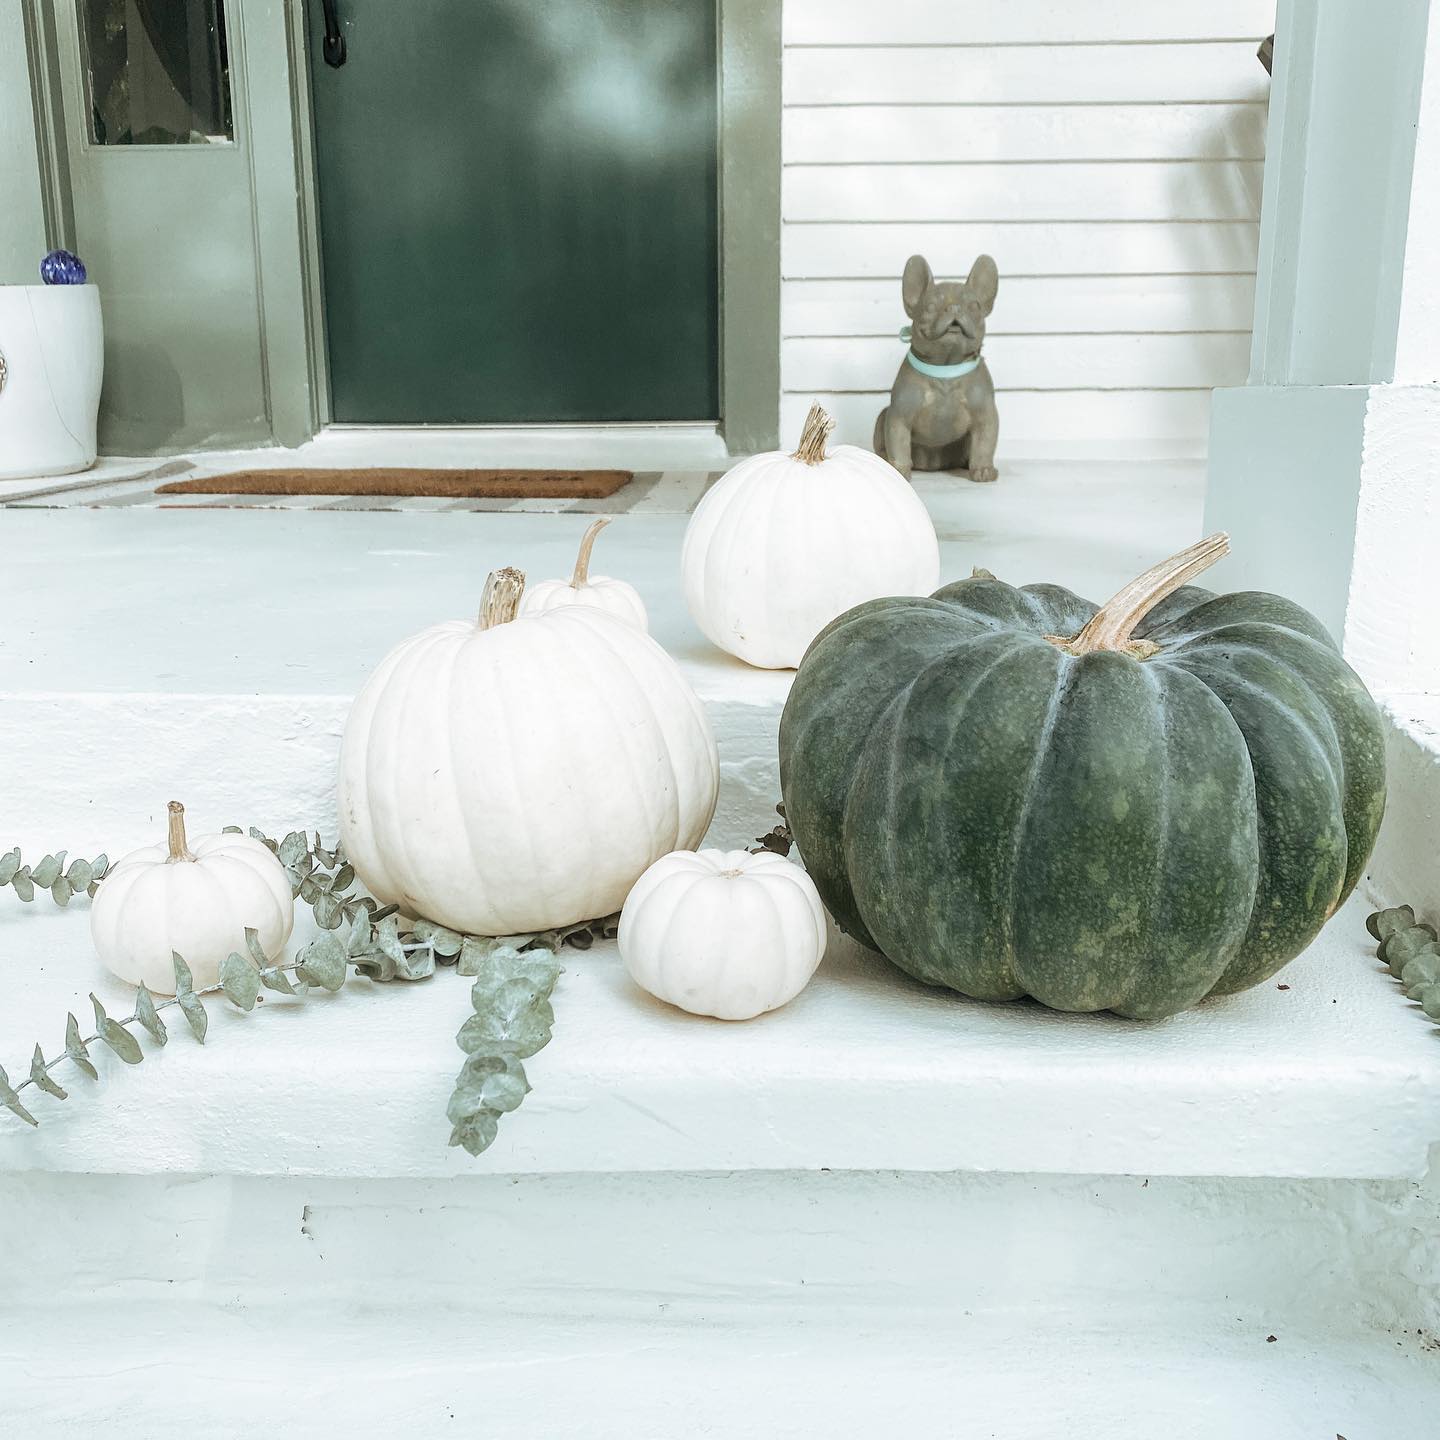 120567205 724233261505144 8202484360461890285 o 3 tips from local interior designer Lauren Murphy to make your Thanksgiving celebration festive + cozy